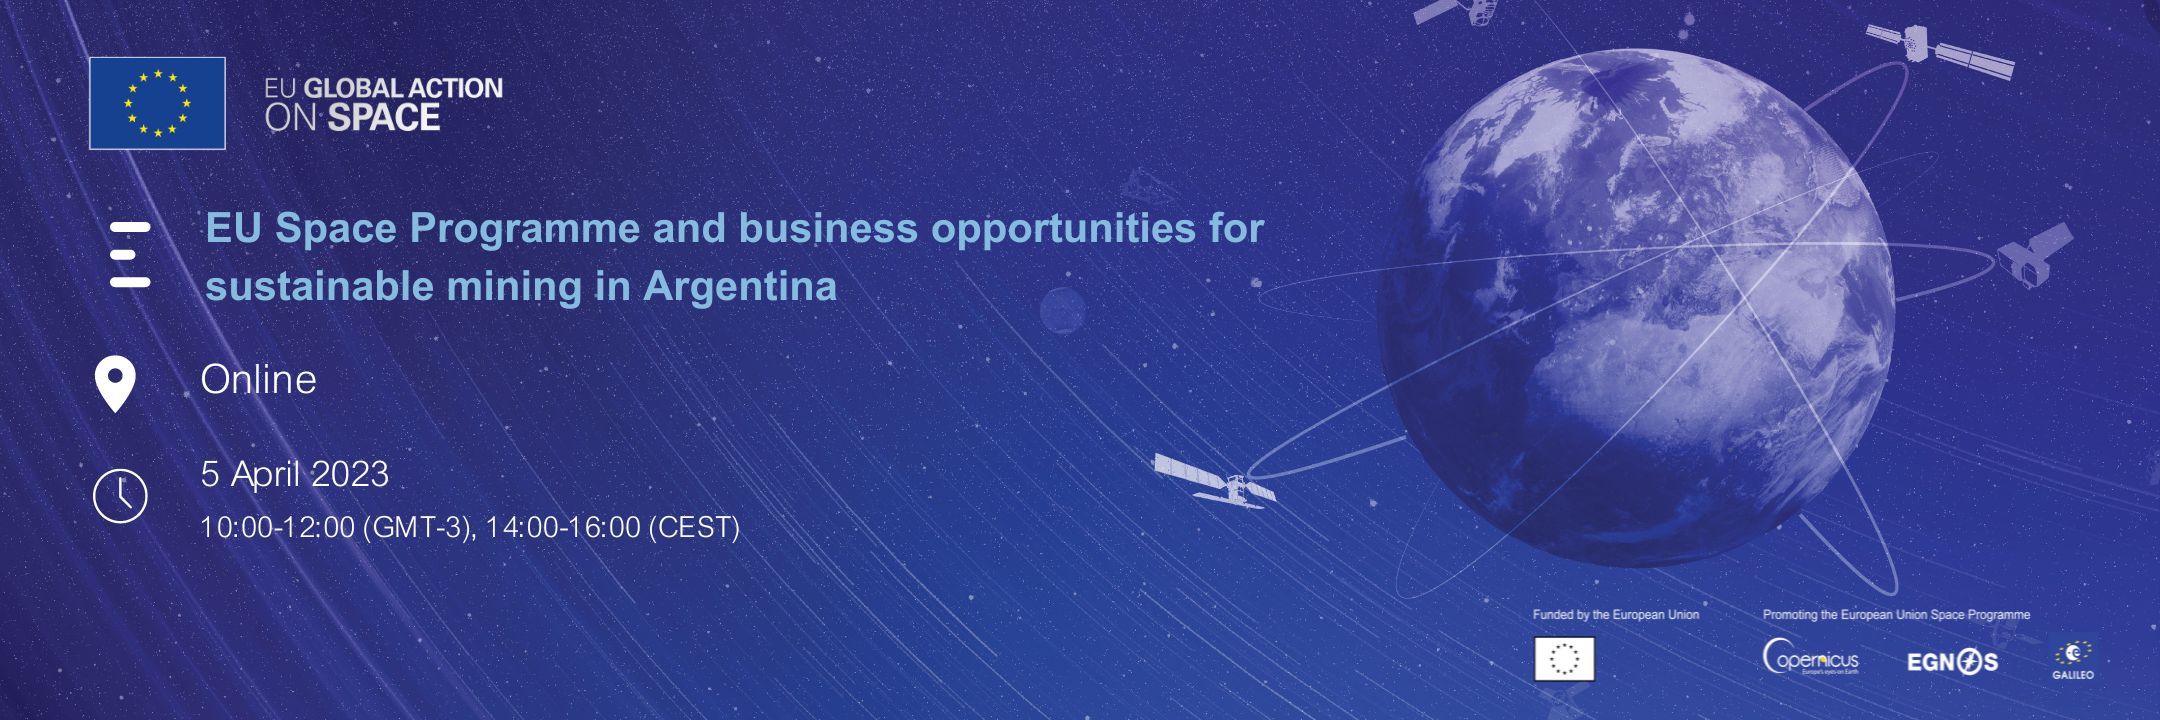 EU Space Programme and business opportunities for sustainable mining in Argentina